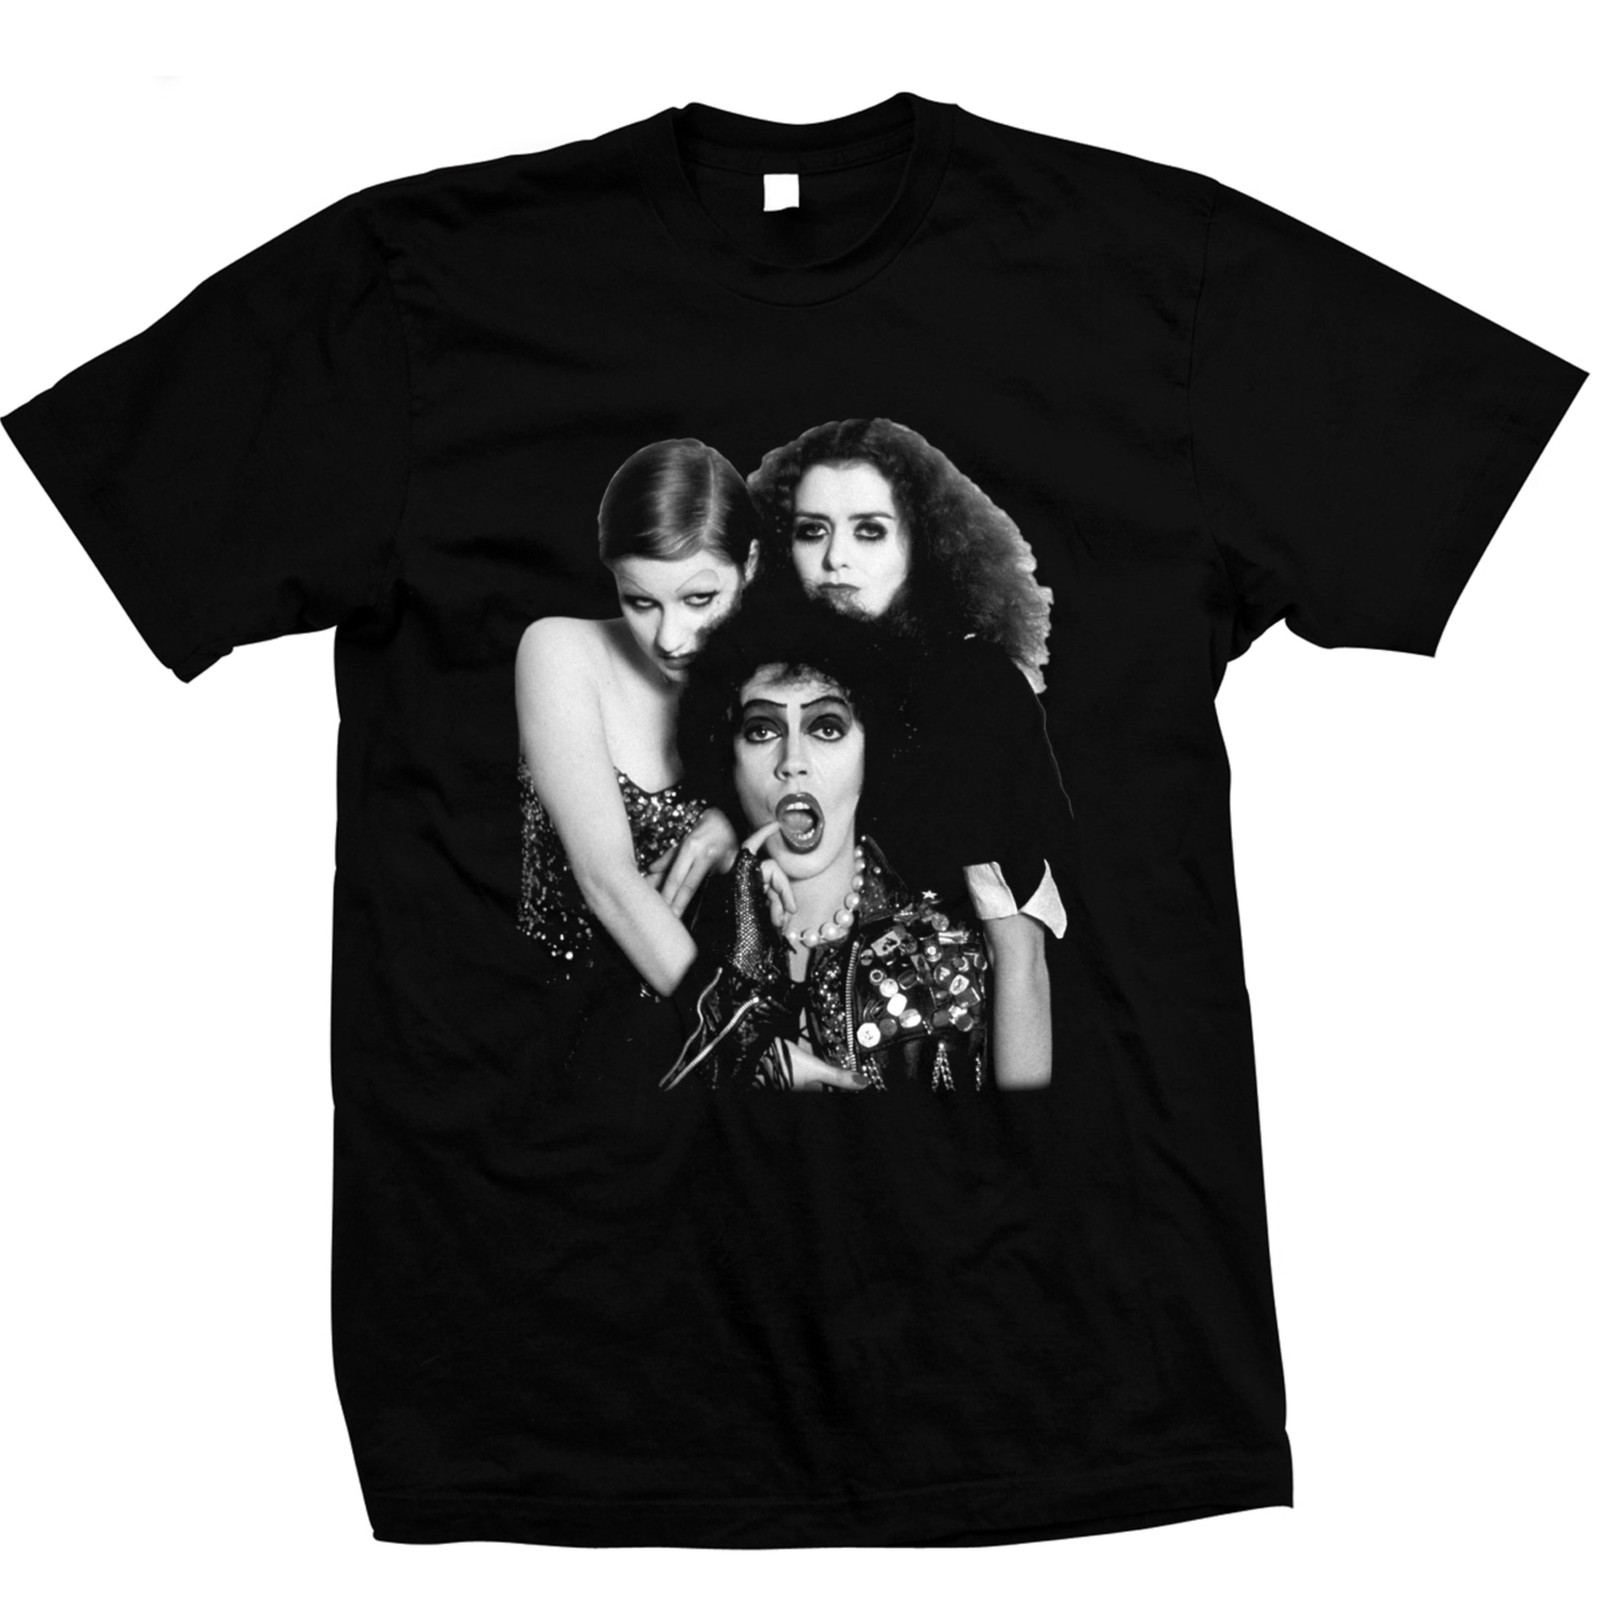 Rocky Horror Picture Show - Pre-shrunk, hand screened 100% cotton t-shirt